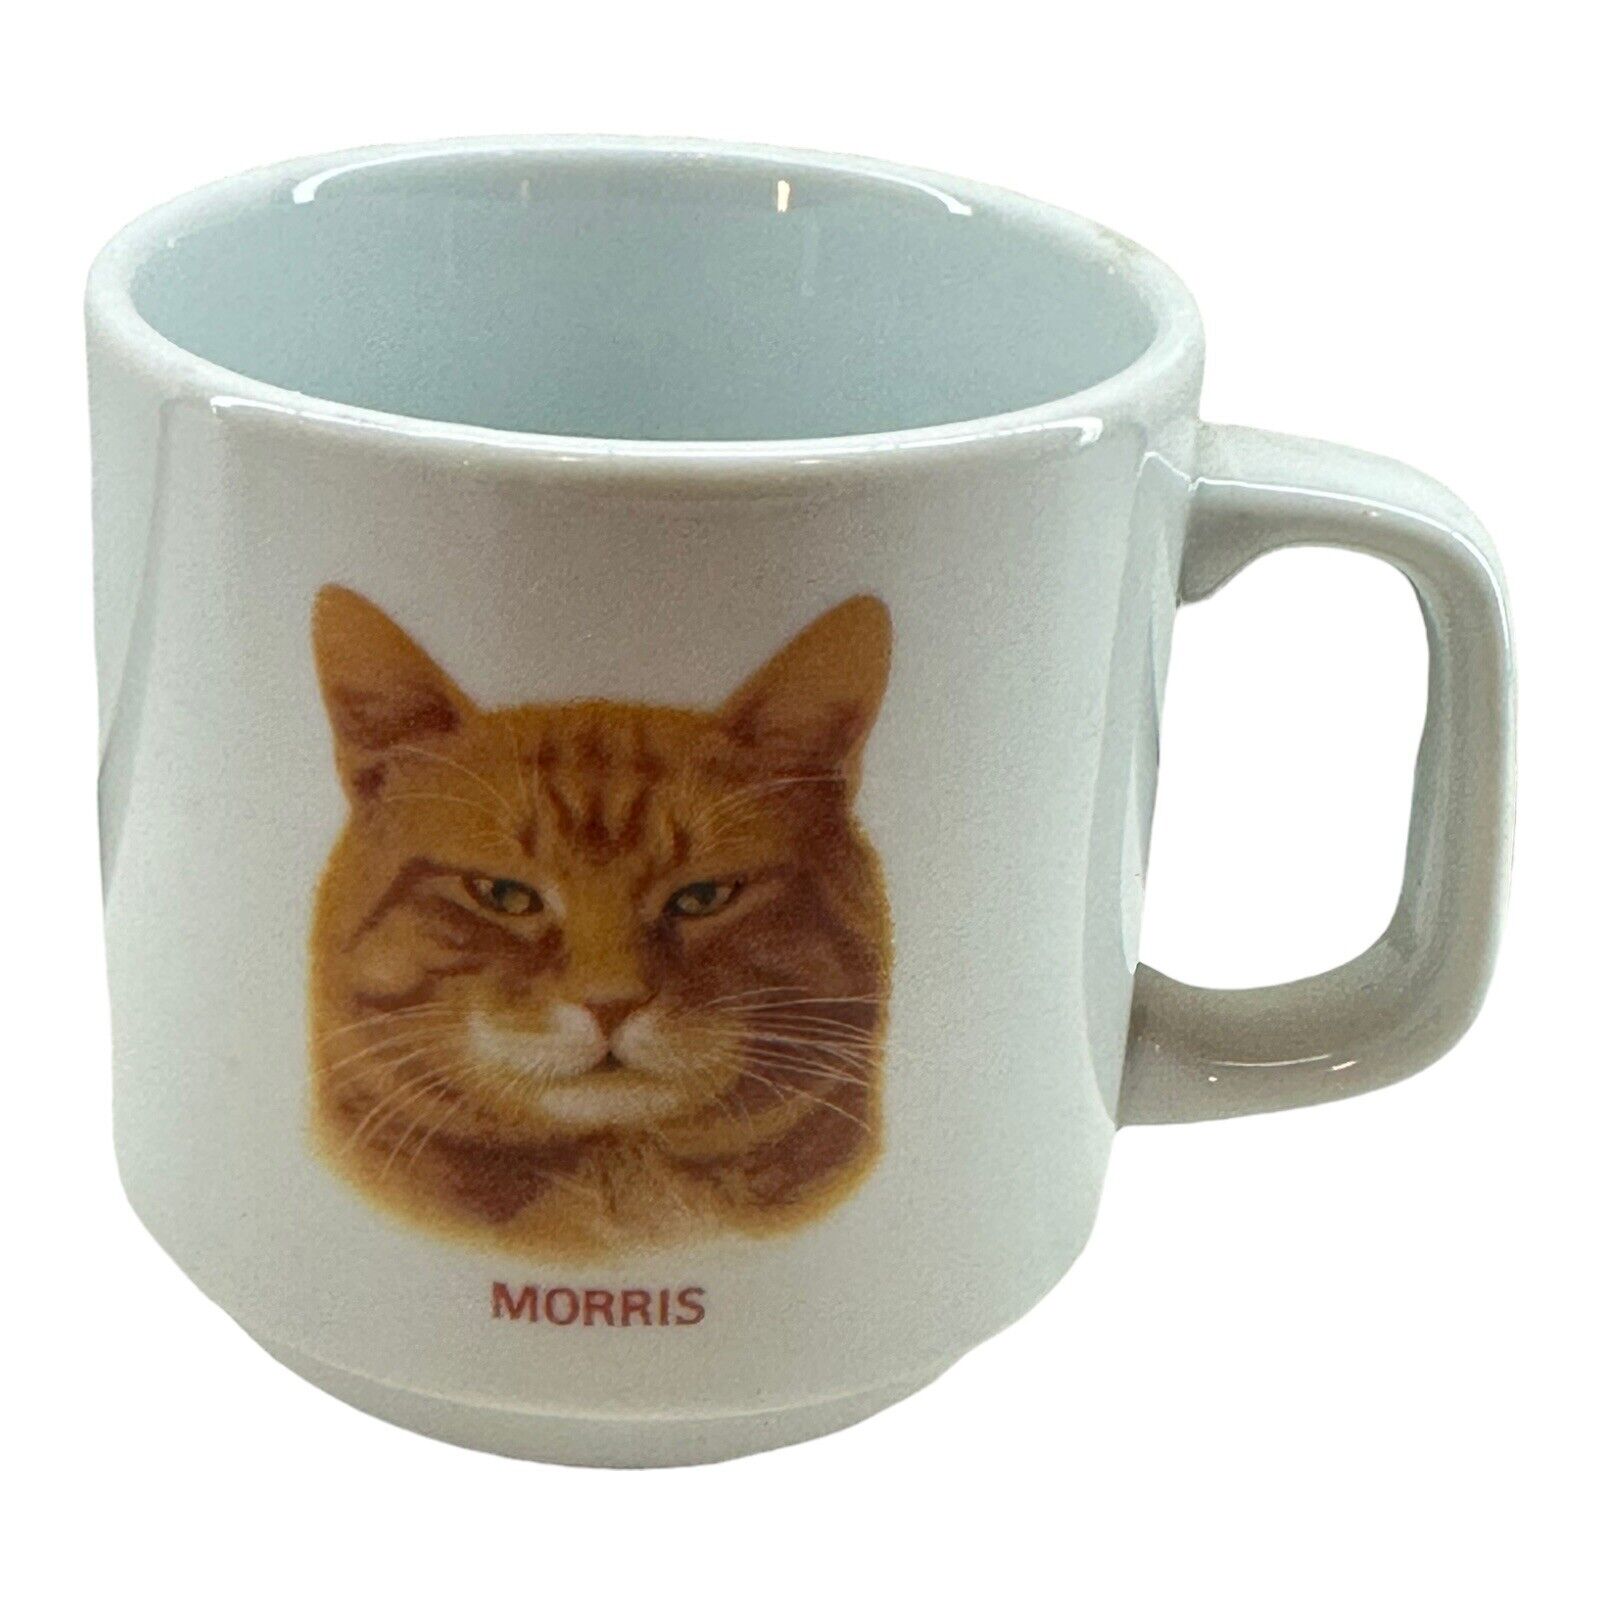 Papel Morris The Cat Coffee Mug Cup 9 Lives Commercial Orange Tabby Vintage